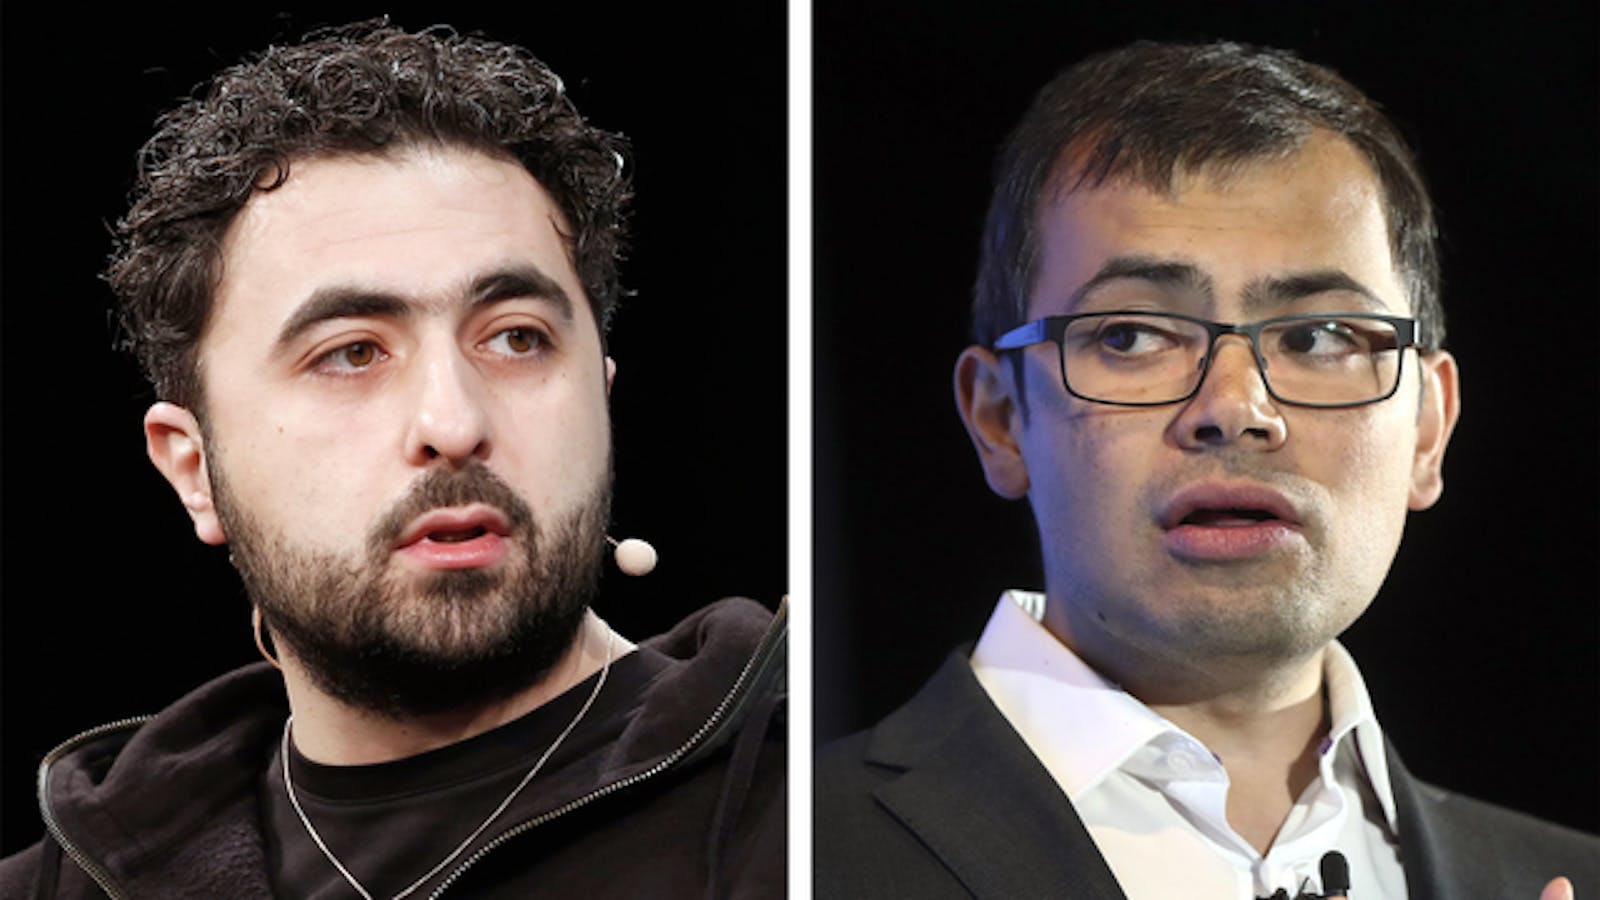 DeepMind co-founders Mustafa Suleyman and Demis Hassabis. Photos by Bloomberg and Flickr/TechCrunch.